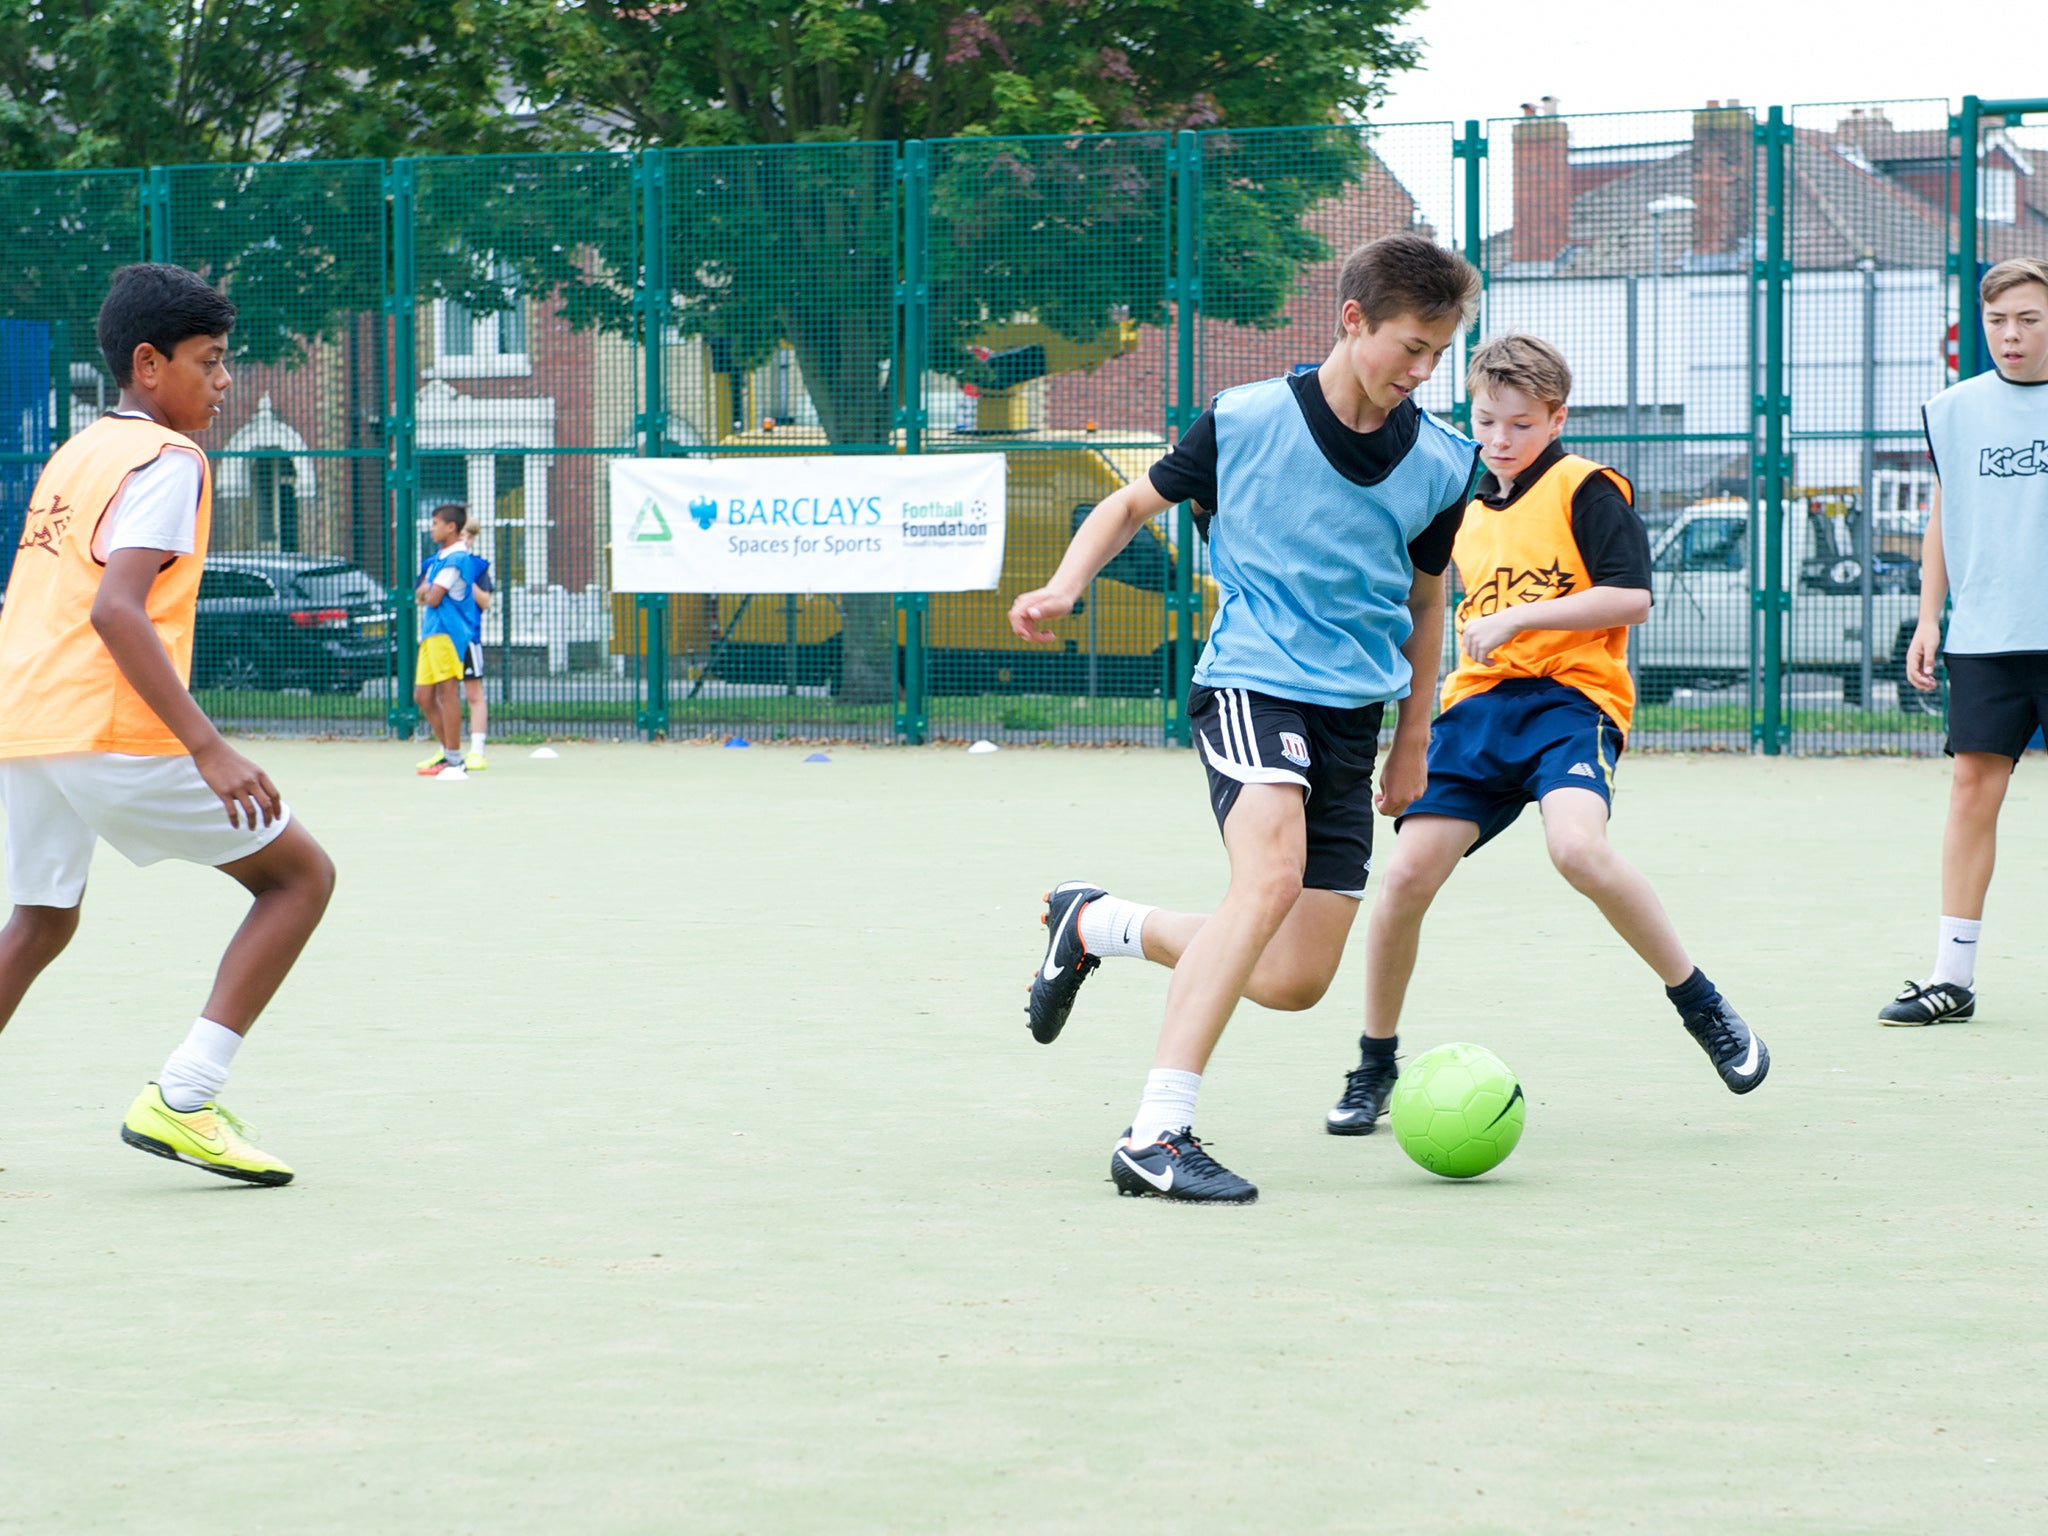 A group of youngsters play on the Bransbury Park pitch in Portsmouth funded by Barclays and the Football Foundation